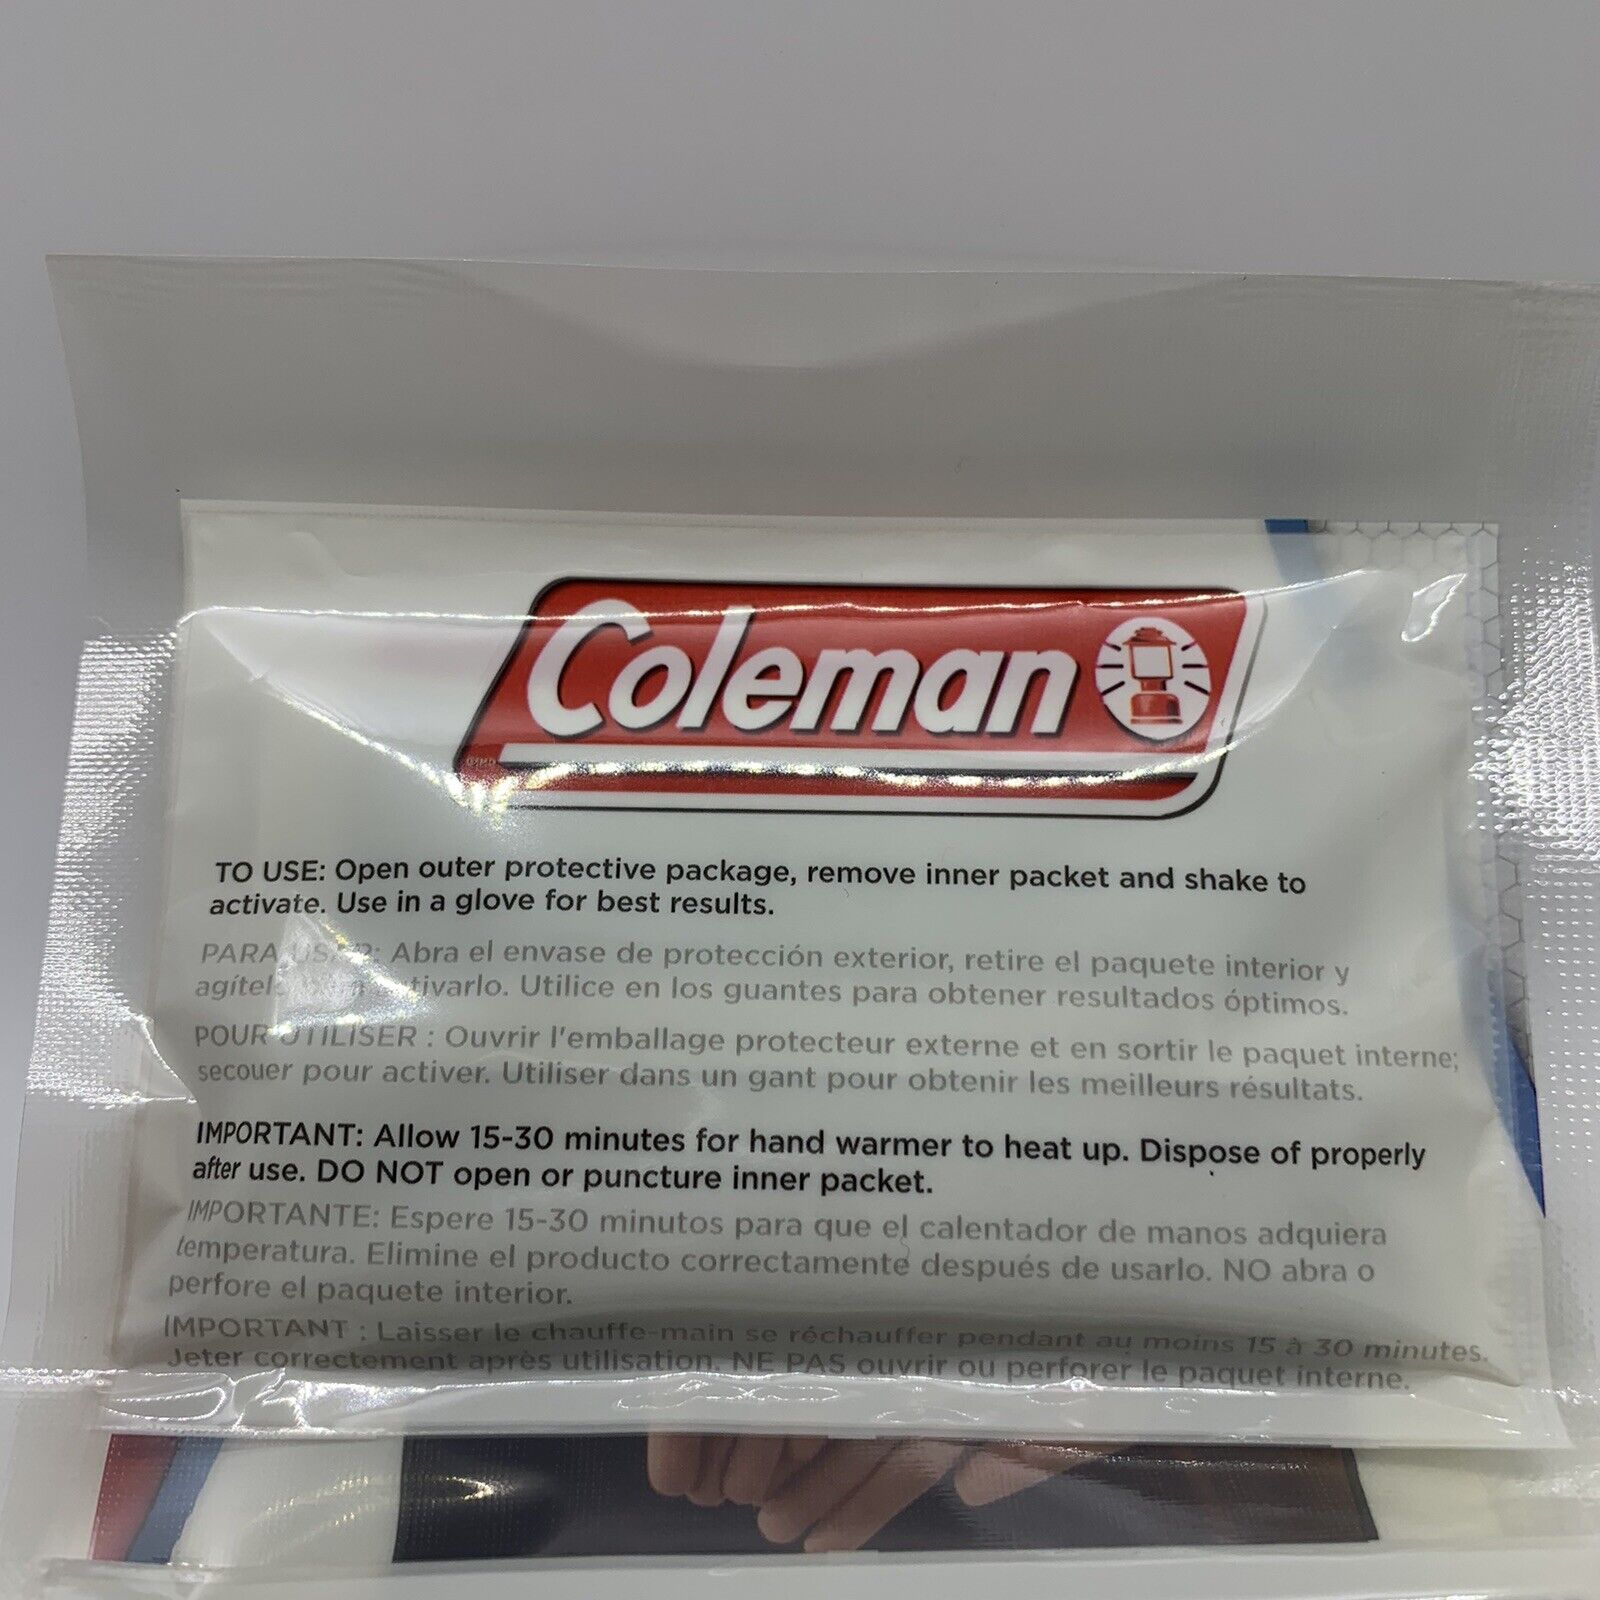 Lot of 3 Coleman Hand Warmers 4 Packs (8 Total) - Buy More And Save More New Coleman 20161116 - фотография #3